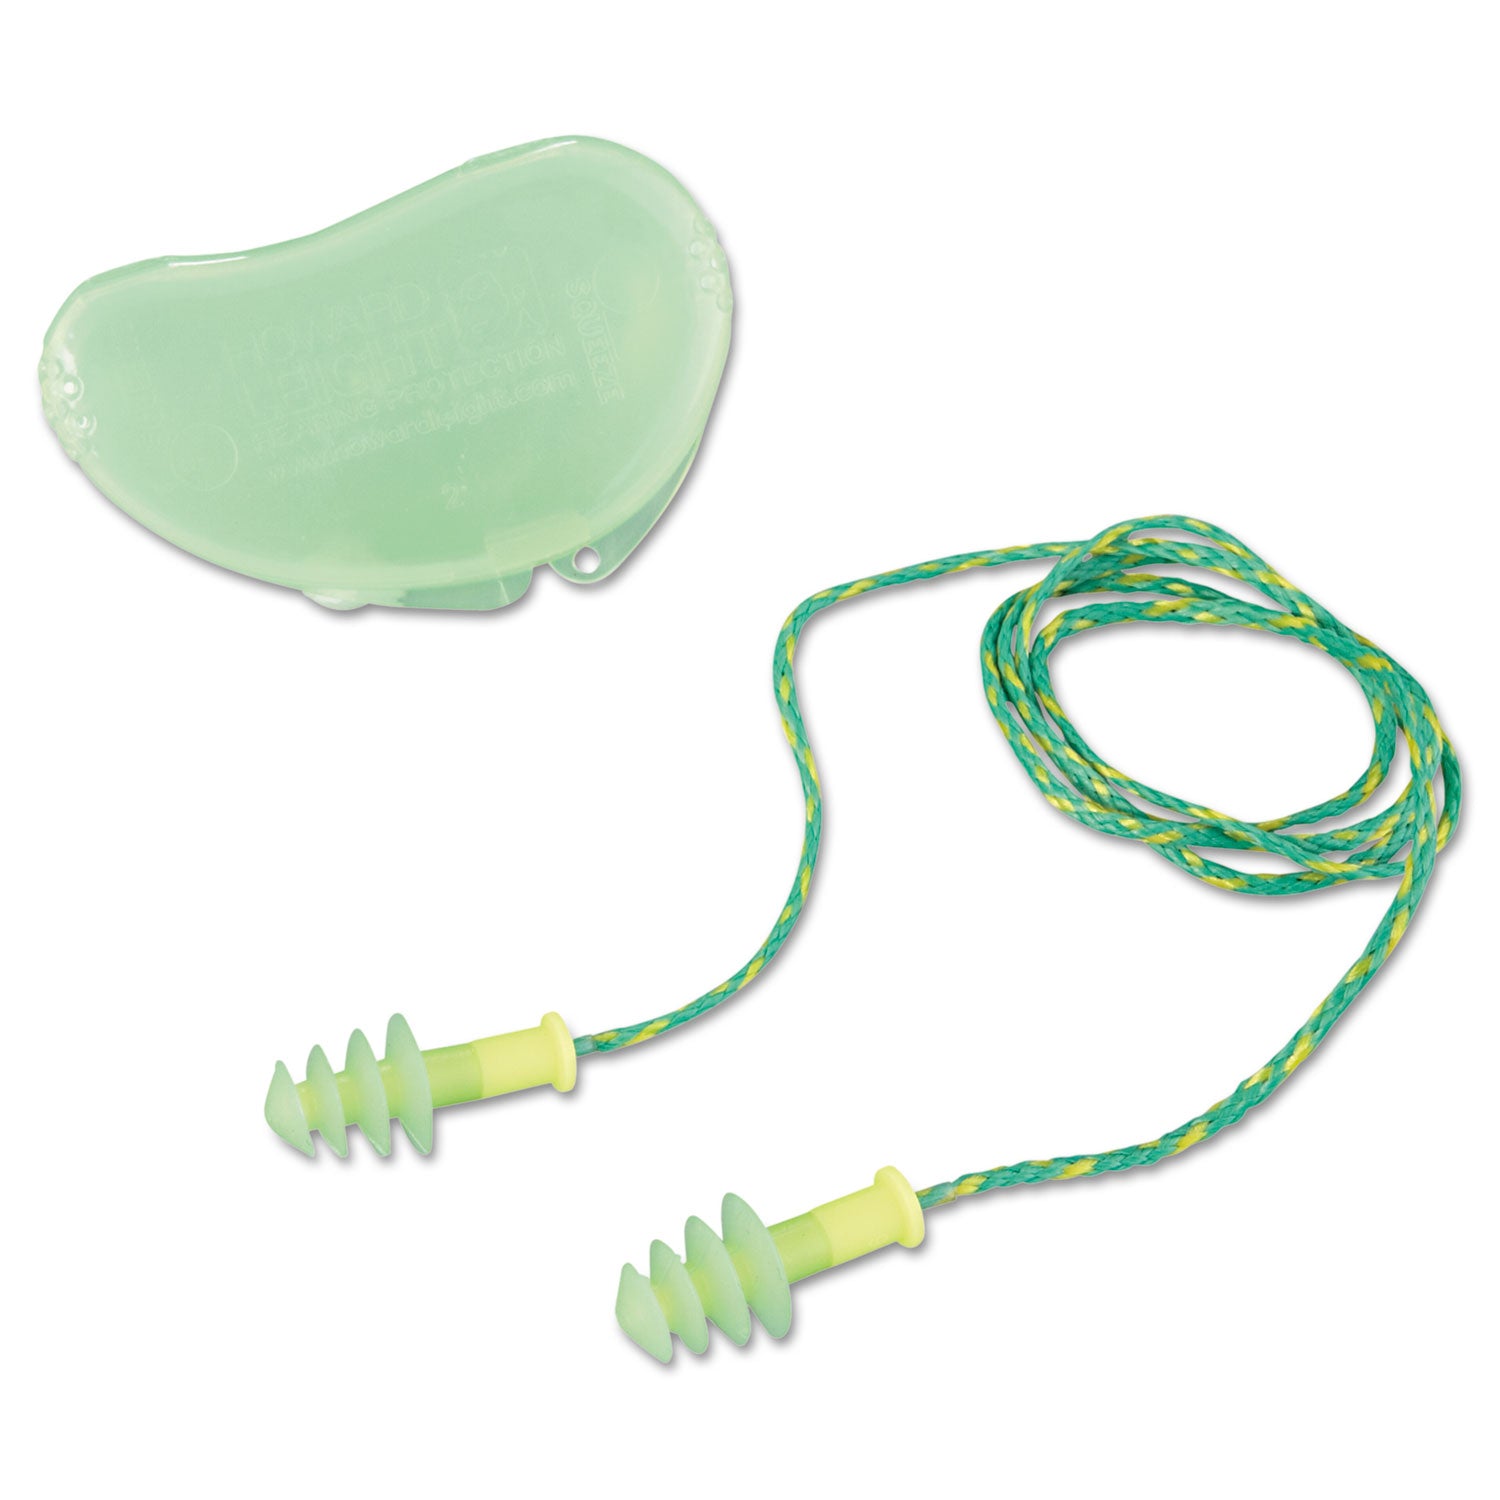 FUS30S-HP Fusion Multiple-Use Earplugs, Small, 27NRR, Corded, GN/WE, 100 Pairs - 